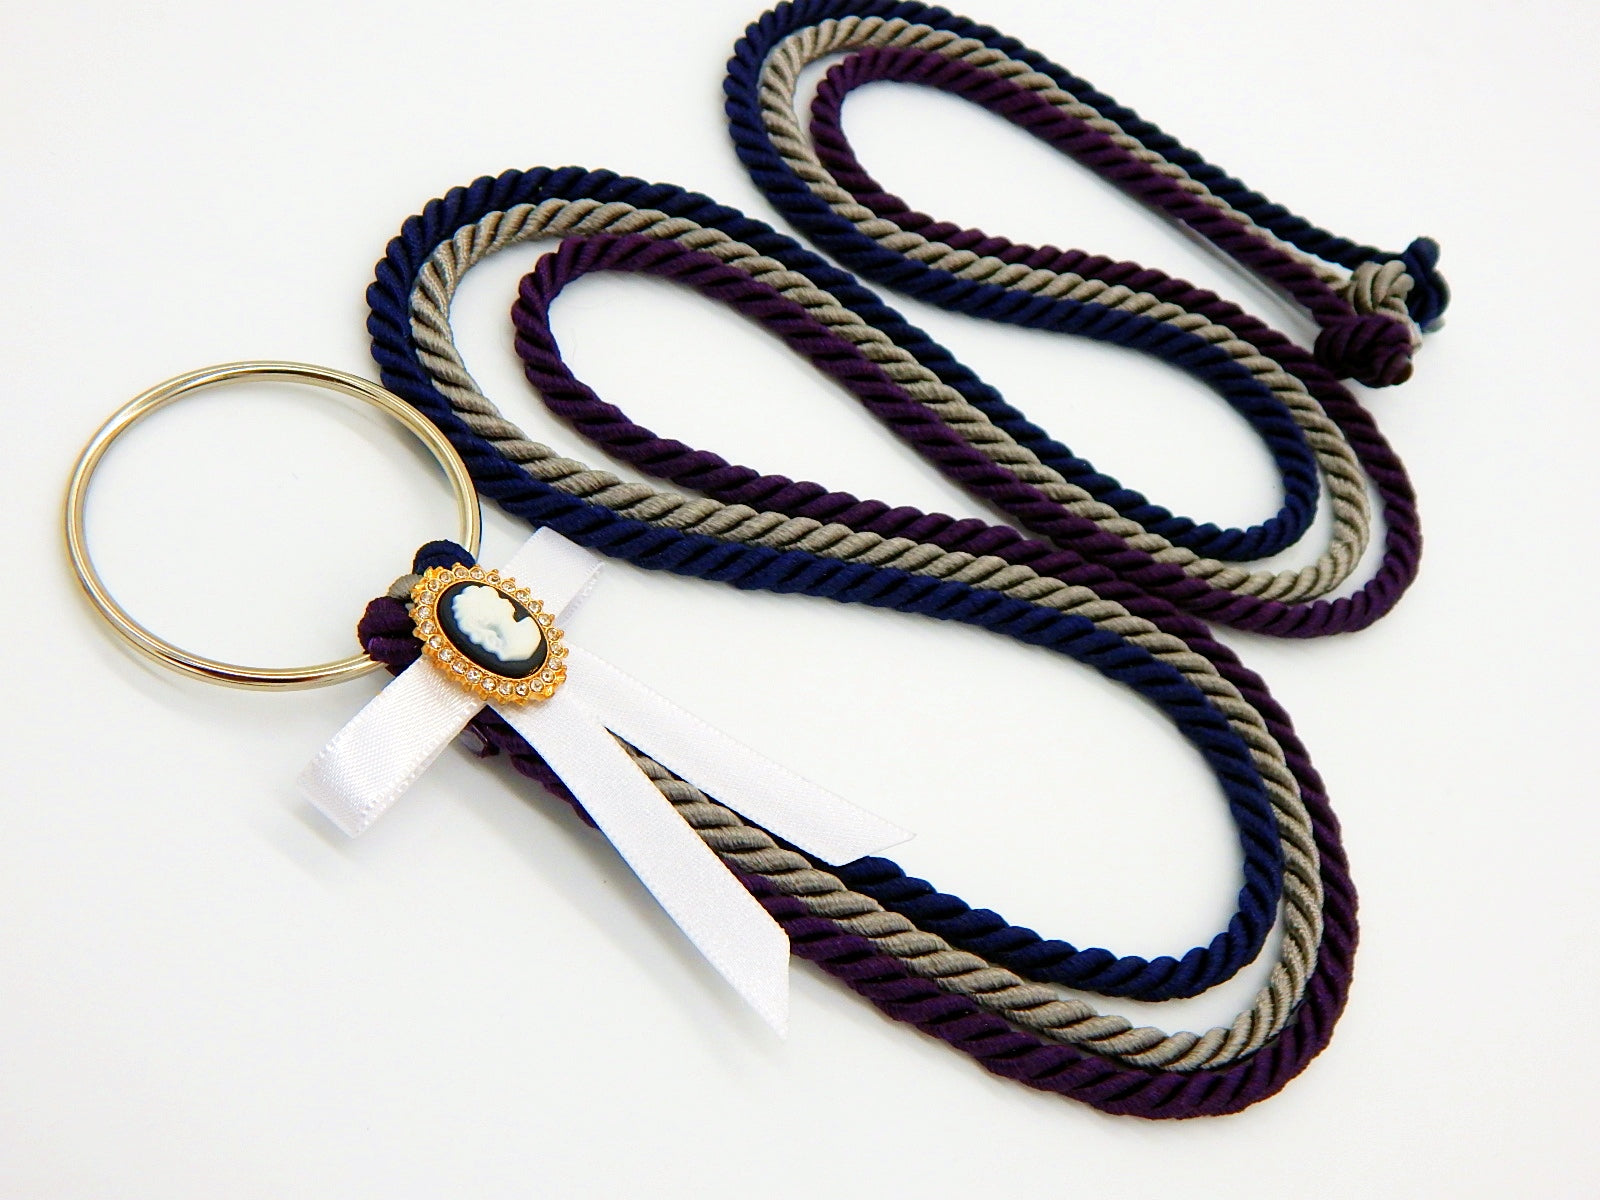 Unity Braids® A Cord Of Three Strands With Black and White Cameo Wedding Cords - Unity Braids